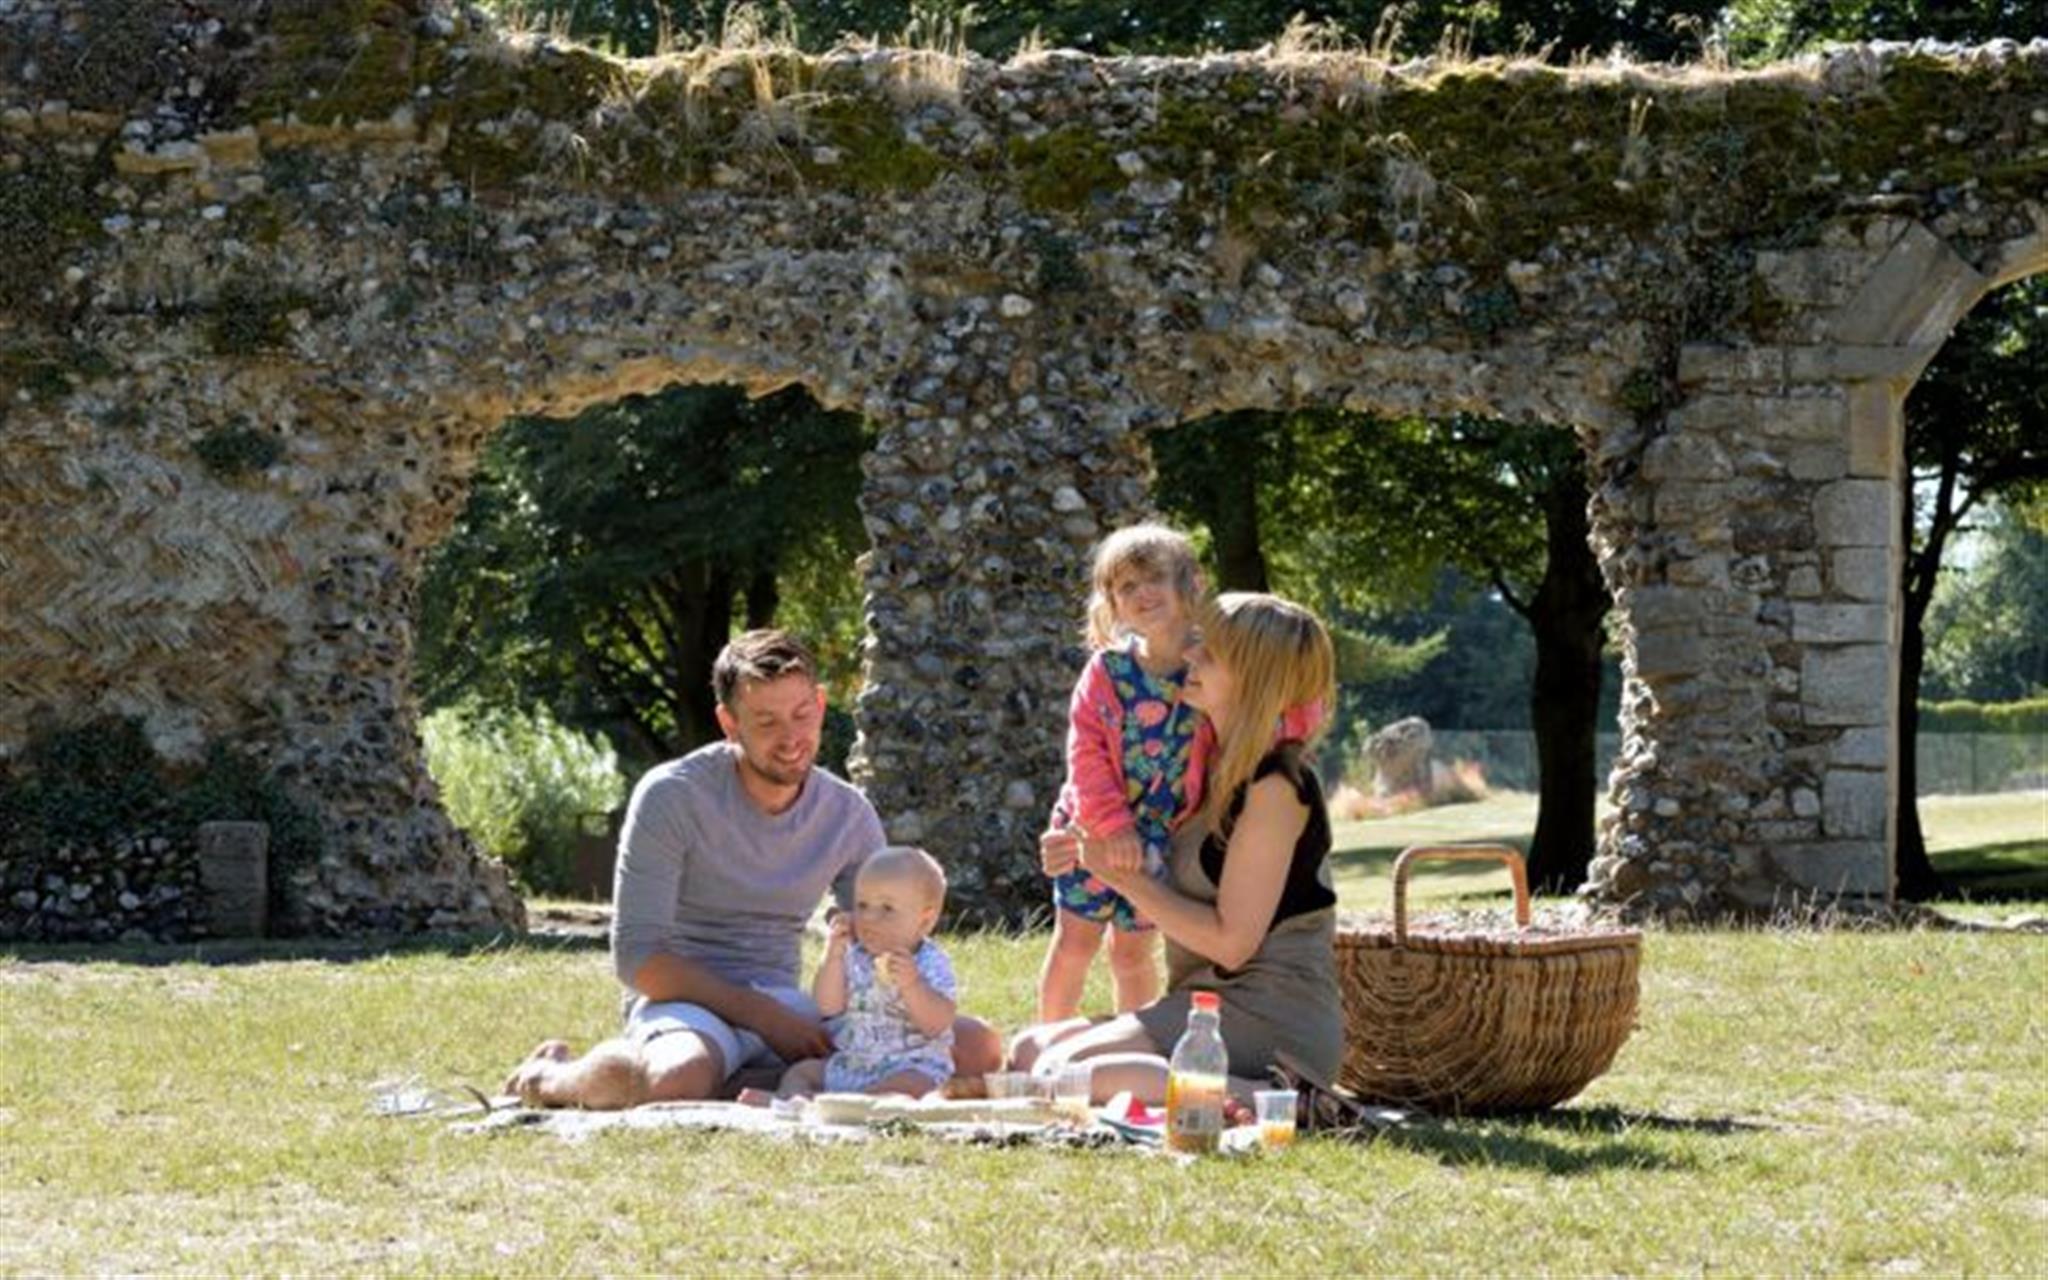 Picnic in the Park - Abbey of St Edmunds 1000 Years image